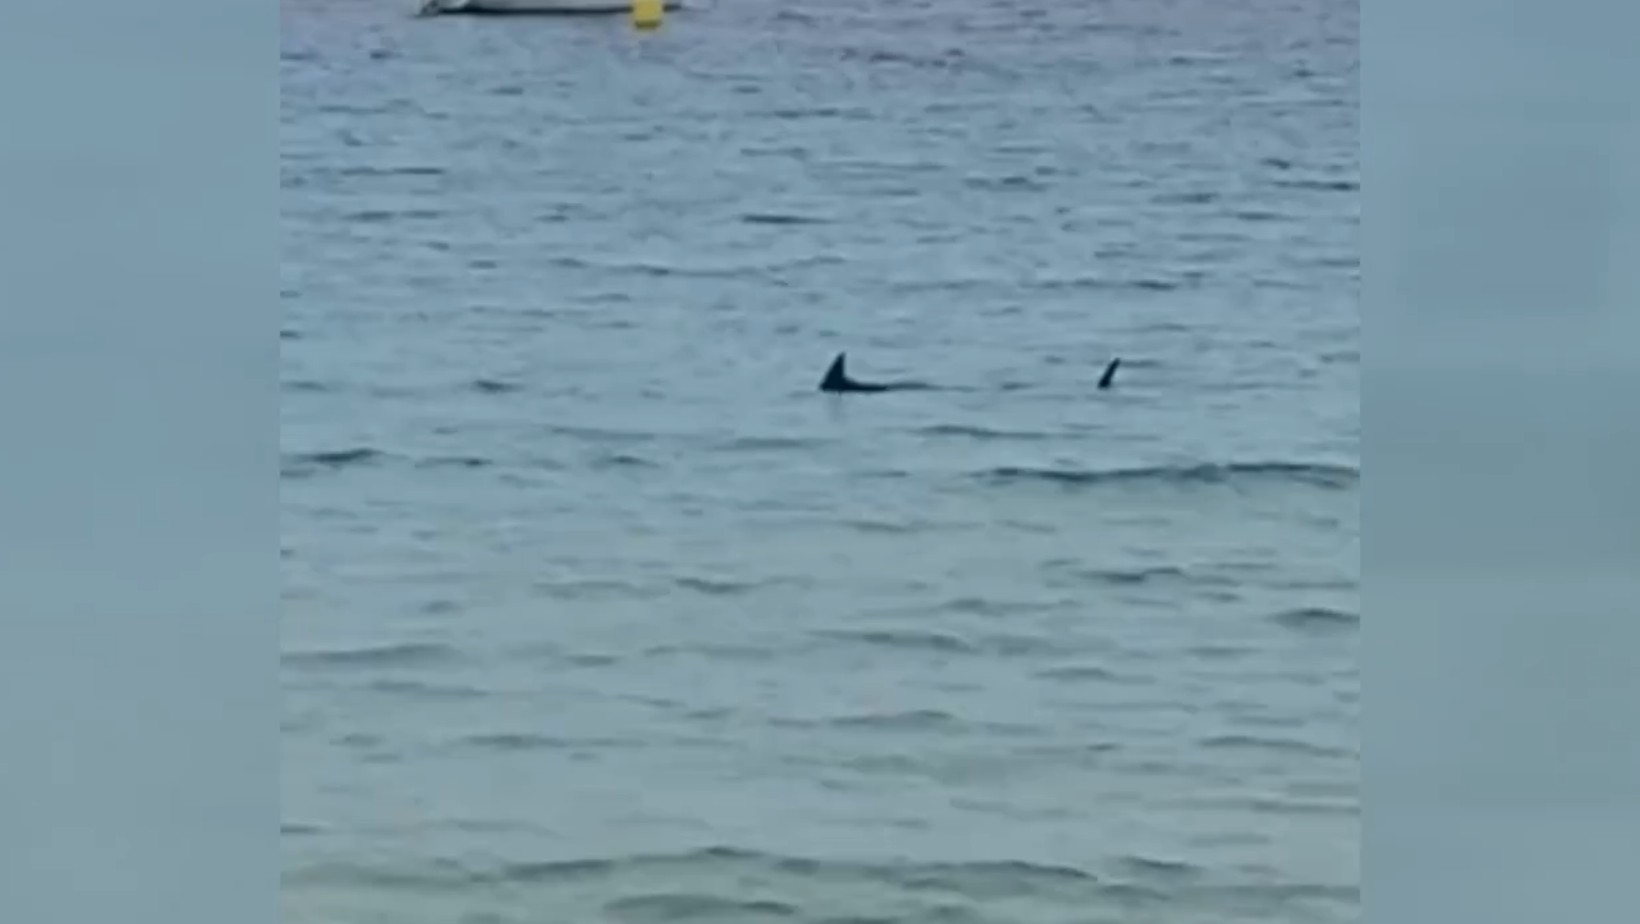 Shark forces beach closure in Spain: Lifeguards hoist red flag after spotting seven foot creature in the water [Video]